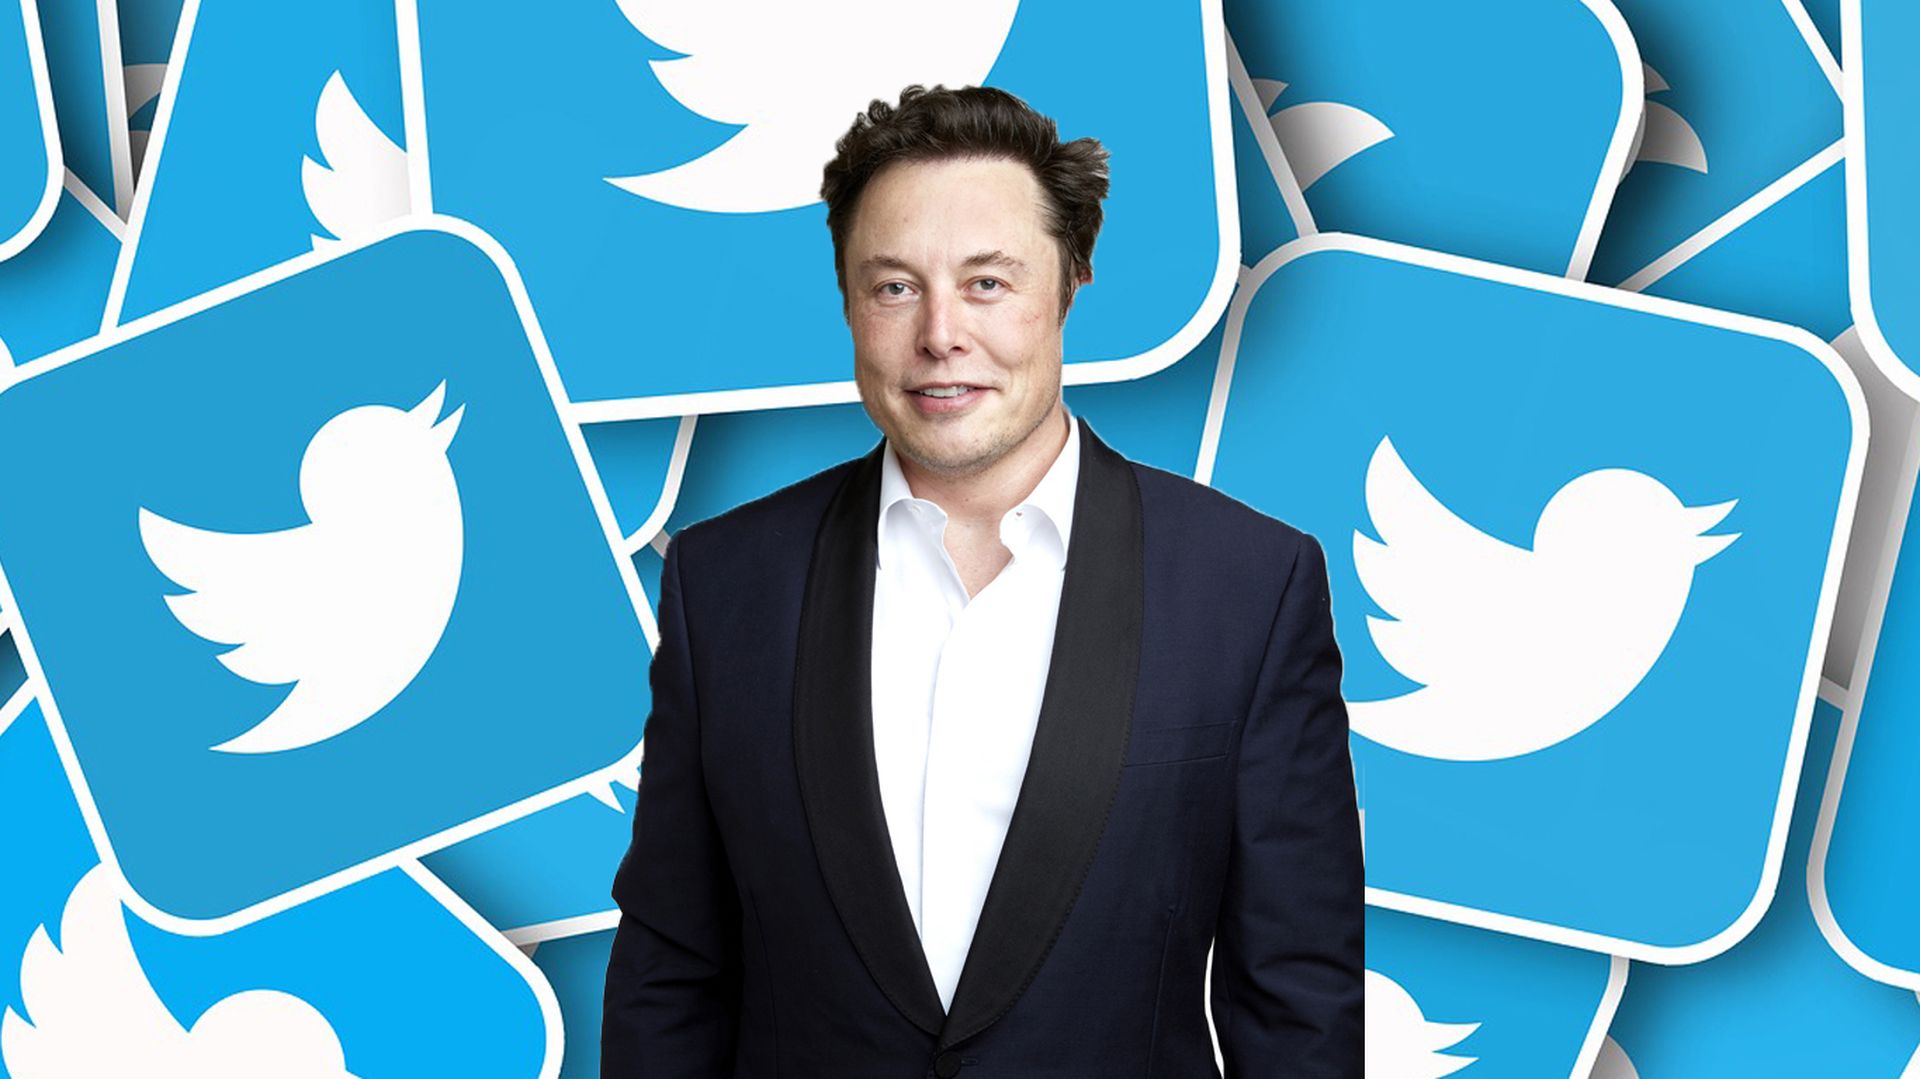 Elon Musk Twitter deal is allegedly coming to an end this Friday